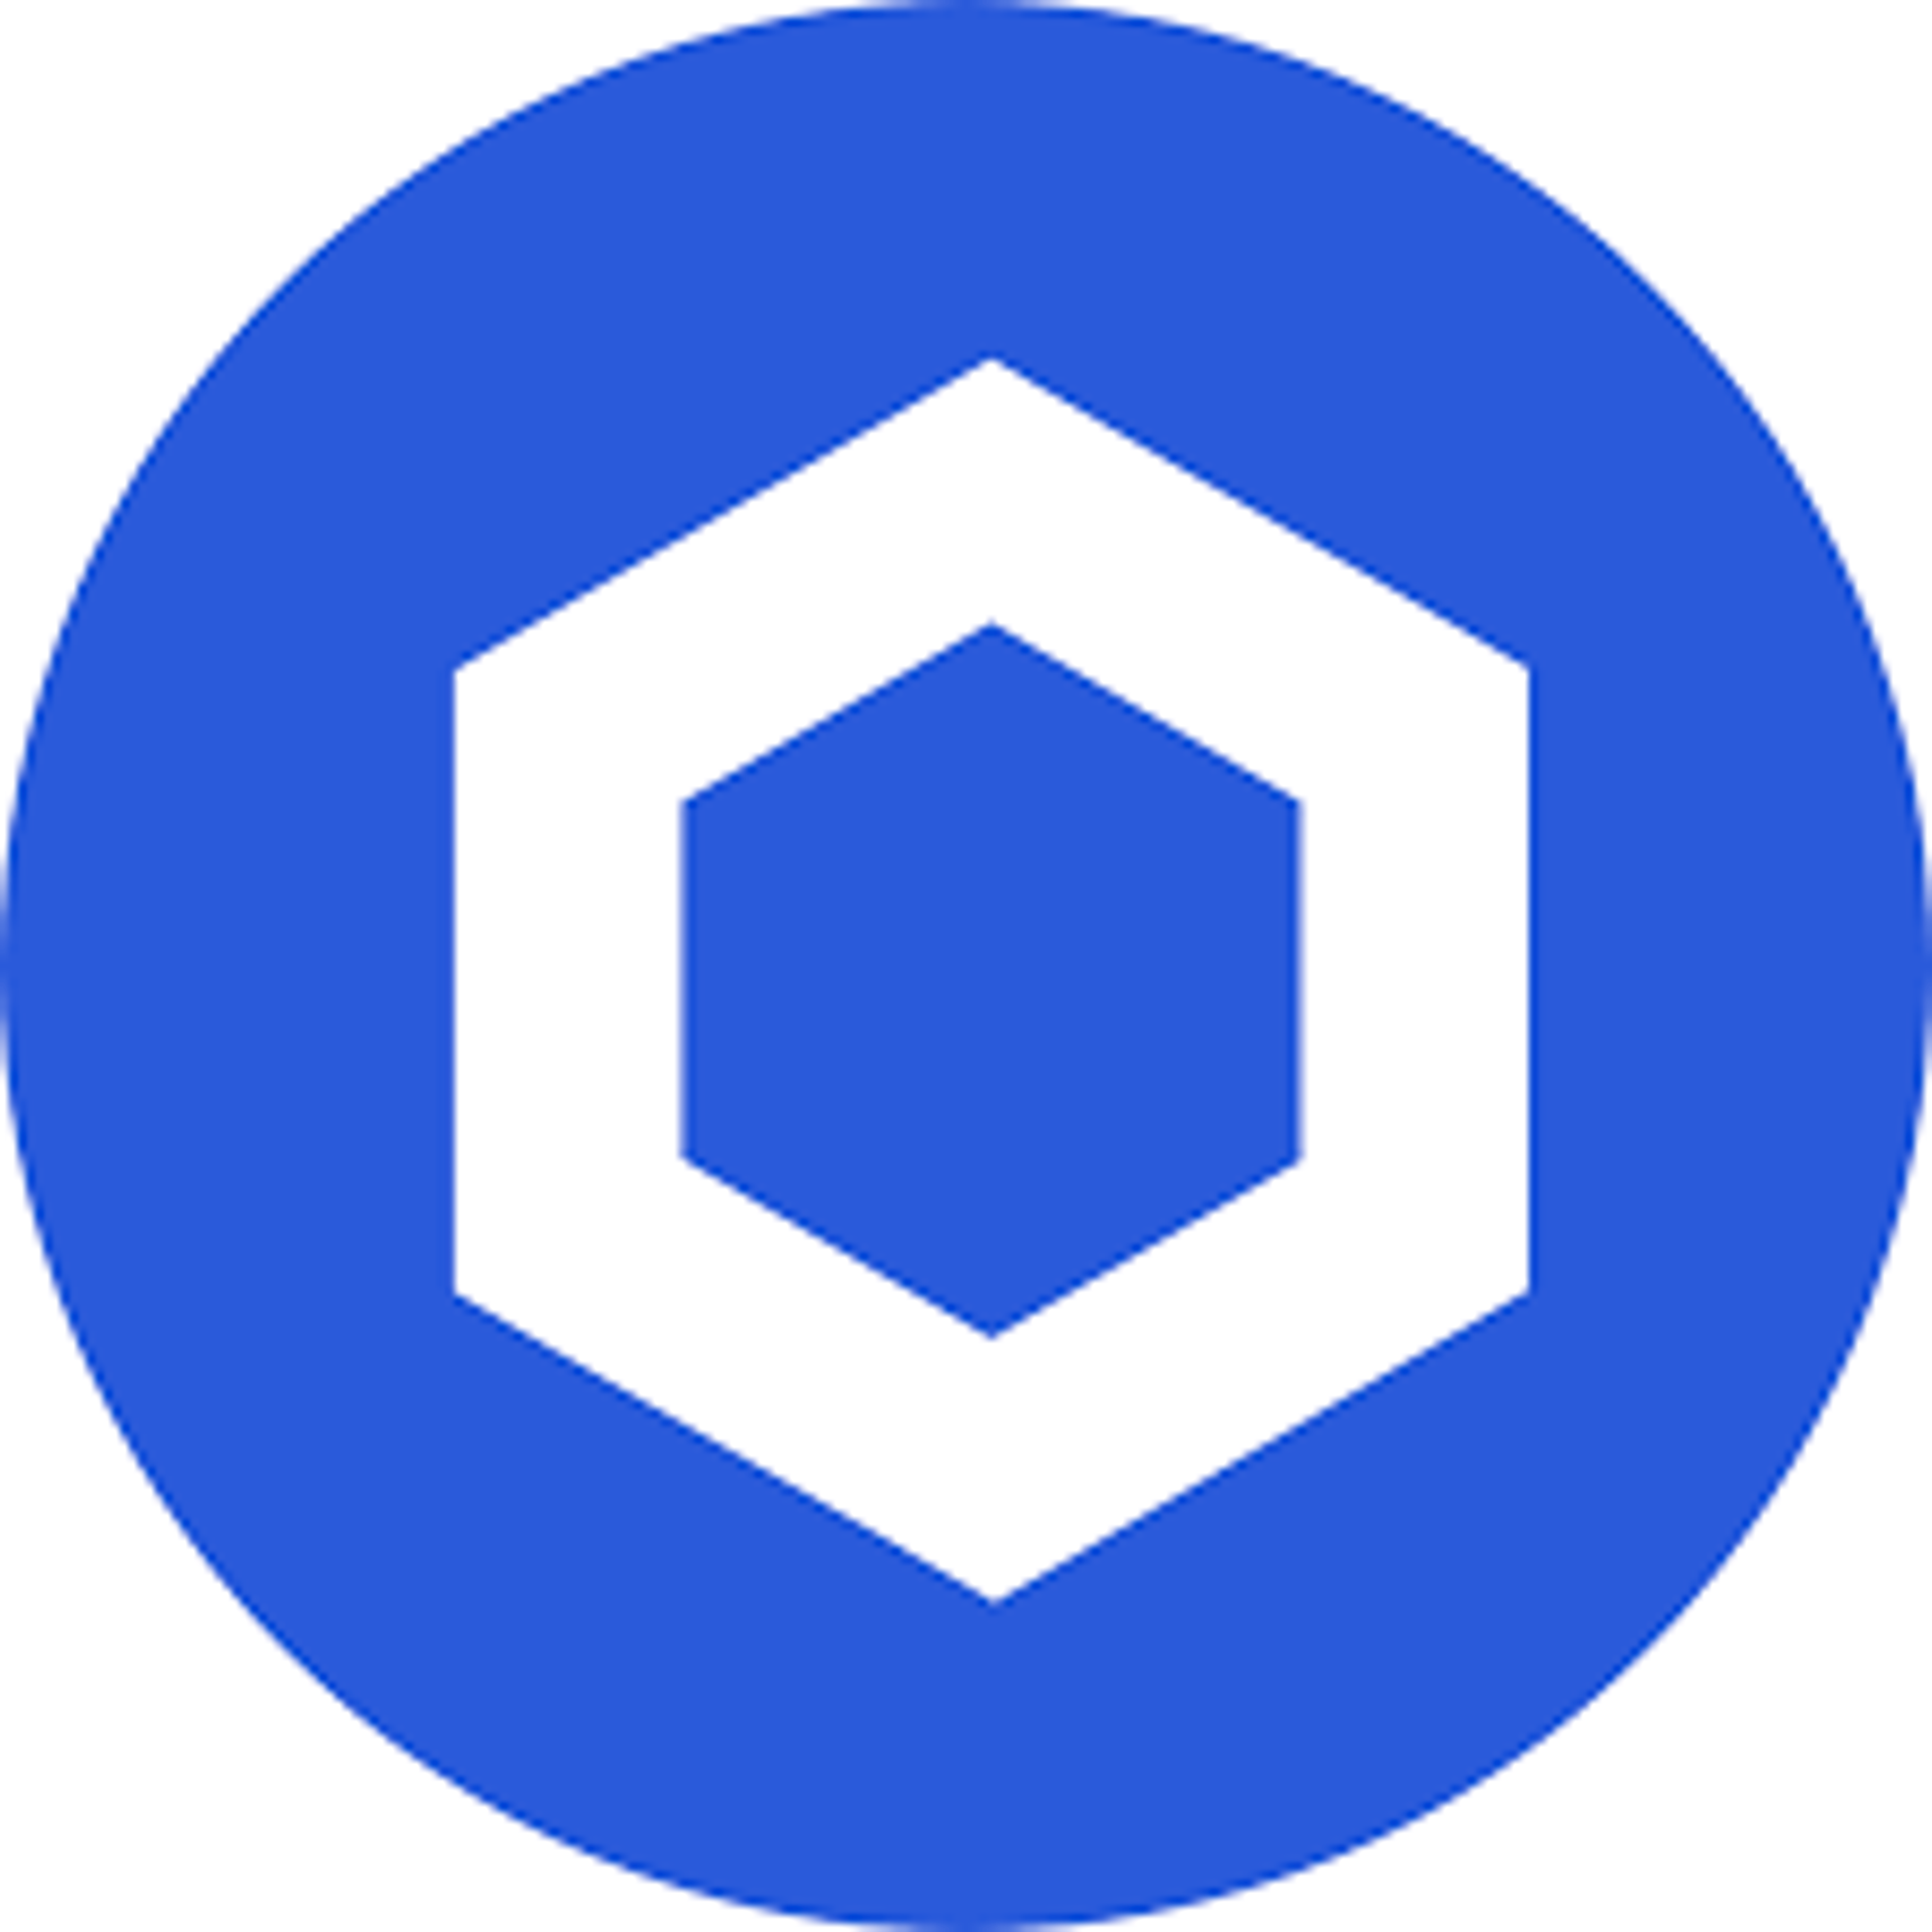 Chainlink Price Prediction (LINK)